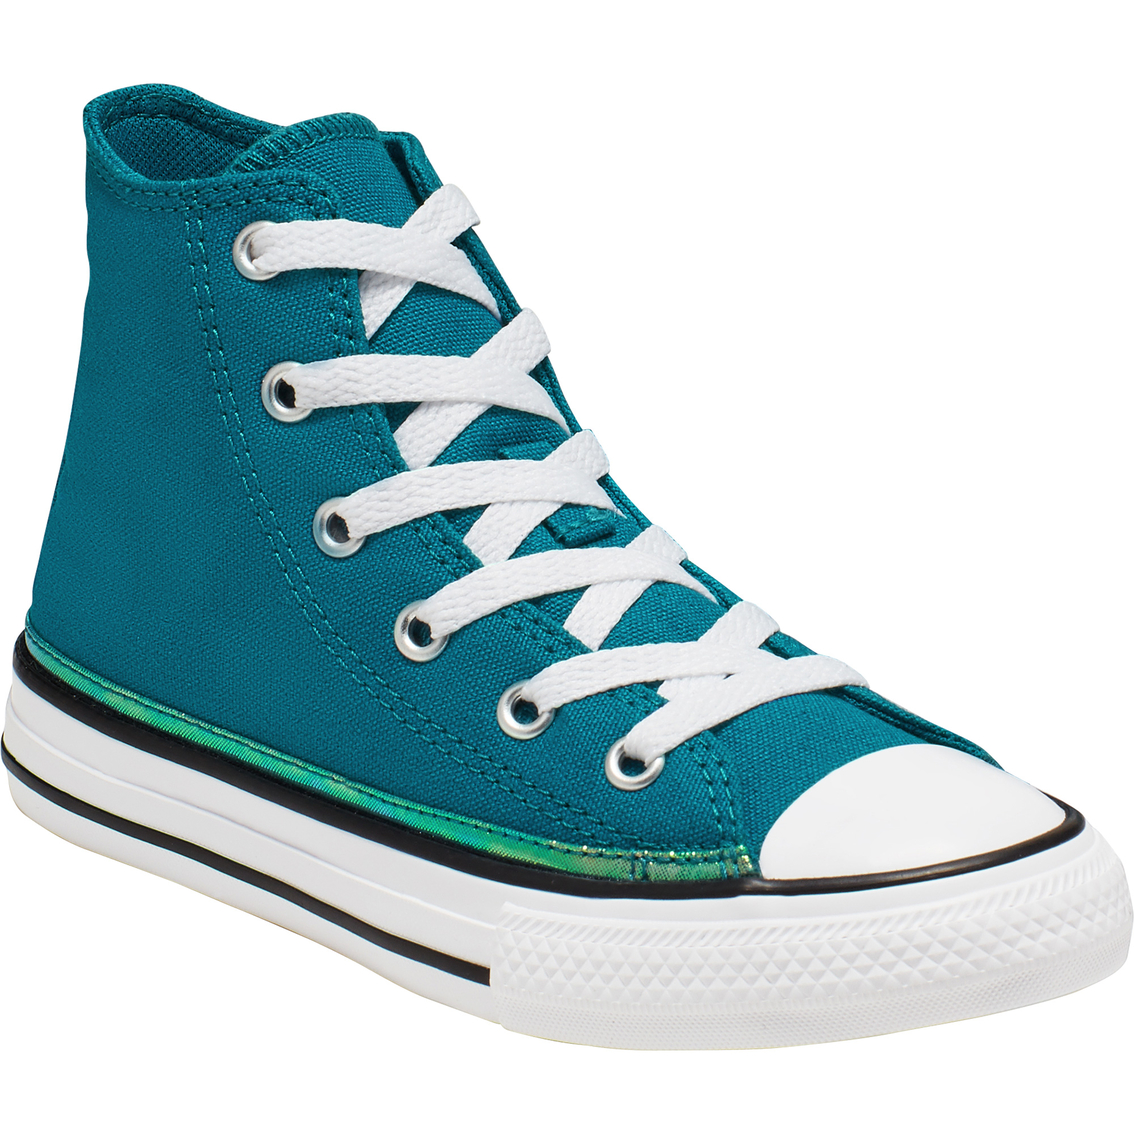 converse turquoise high tops sneakers